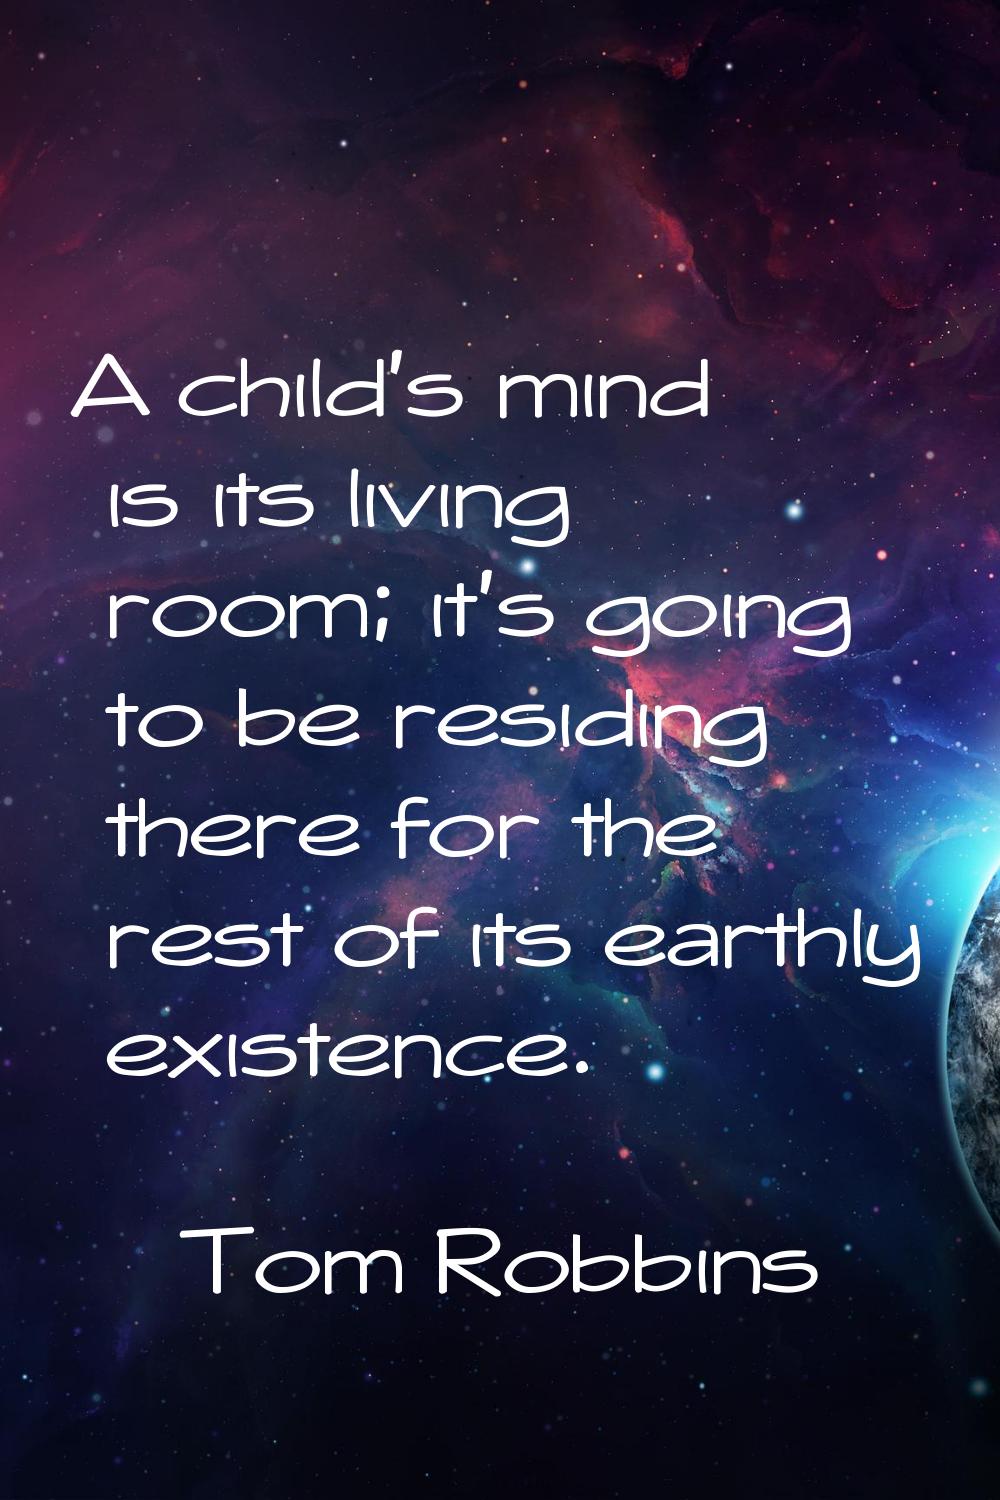 A child's mind is its living room; it's going to be residing there for the rest of its earthly exis